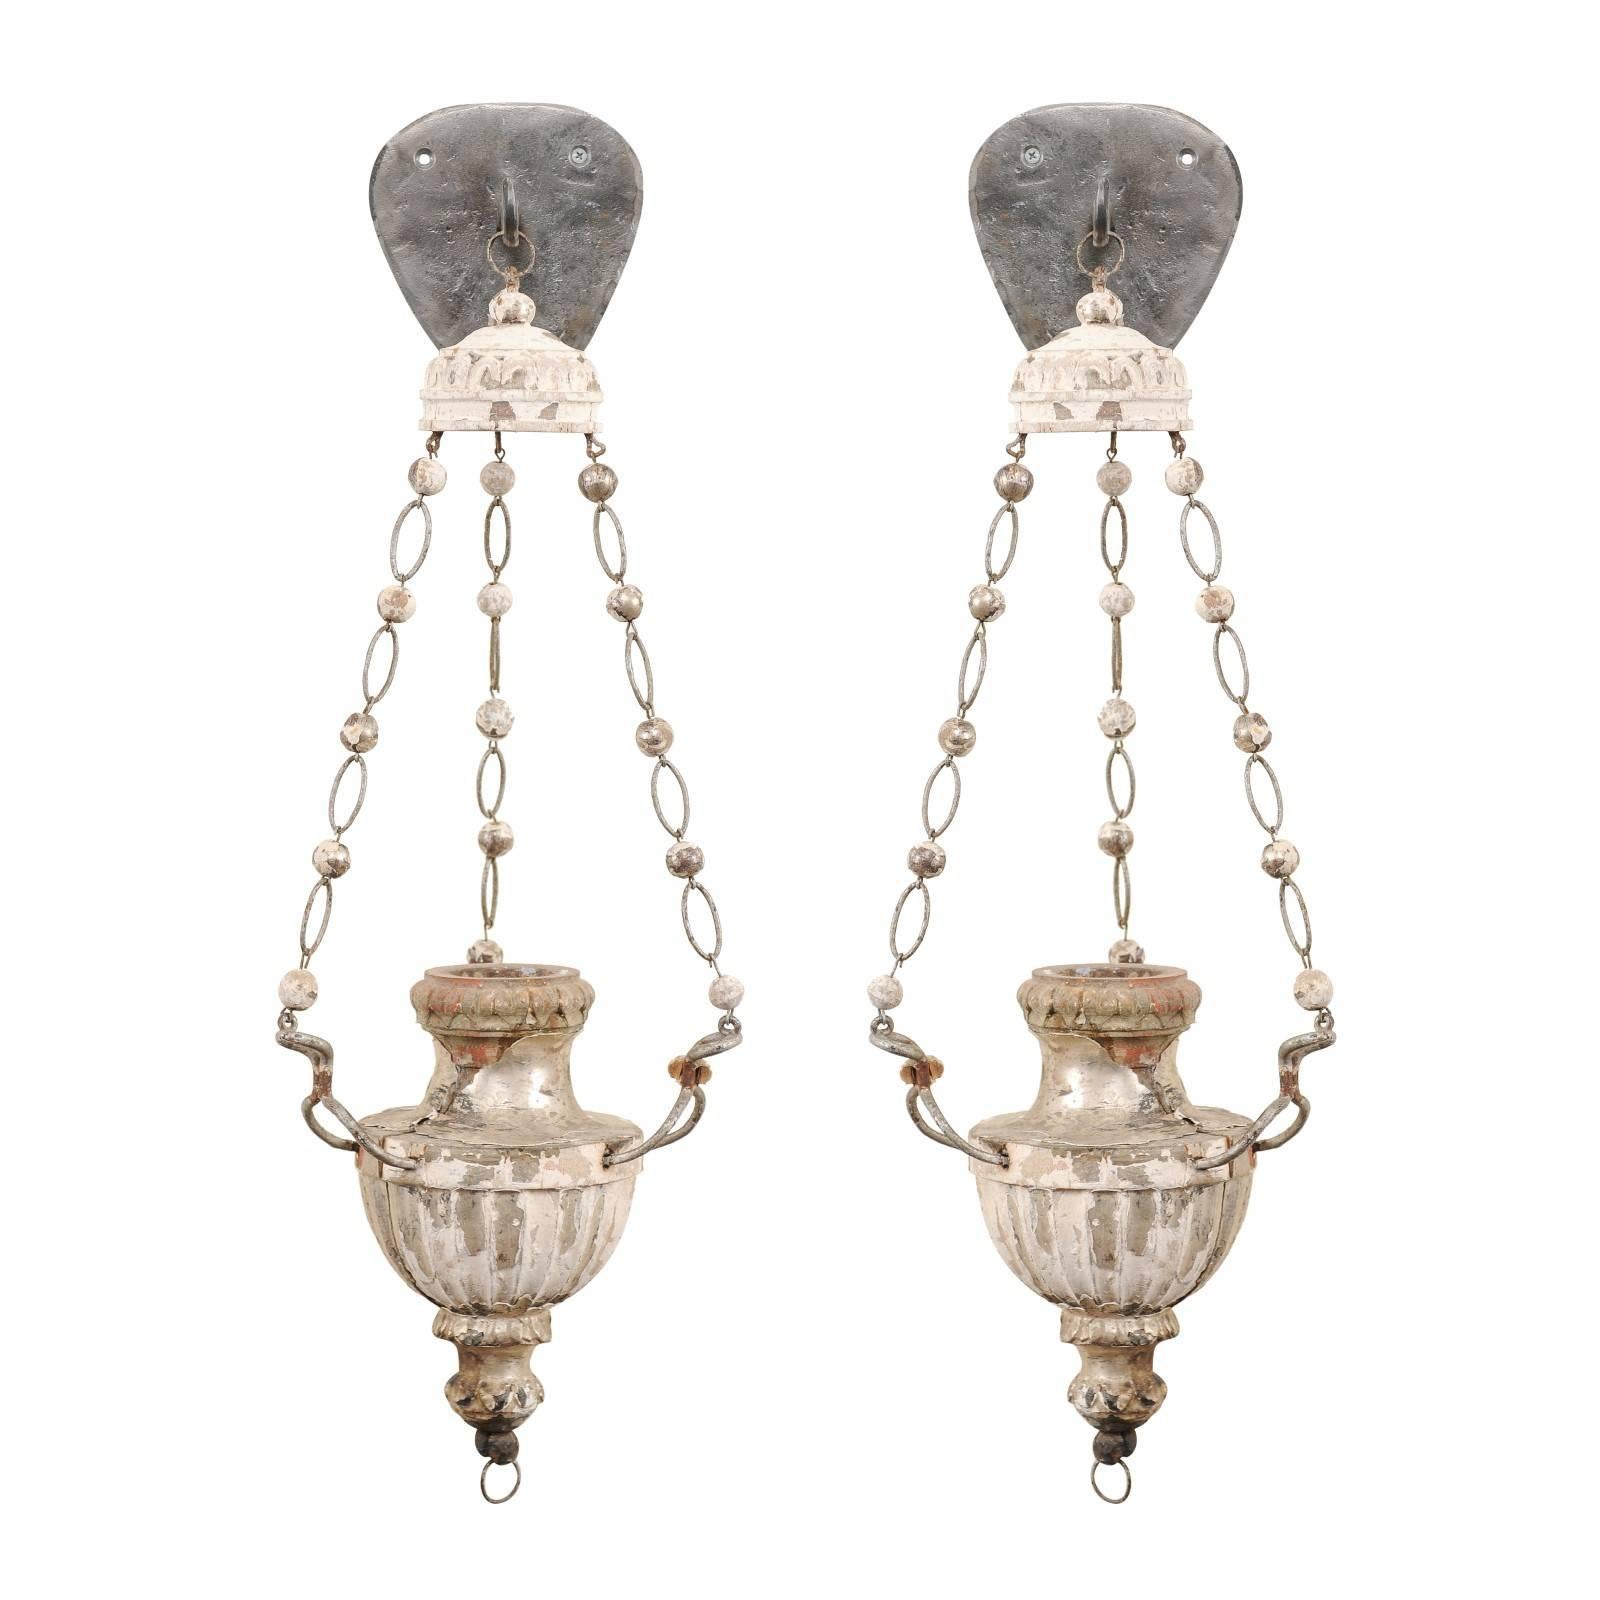 Pair of Italian 19th Century Silver Gilt Hanging Candle Sconces with Bead Chains